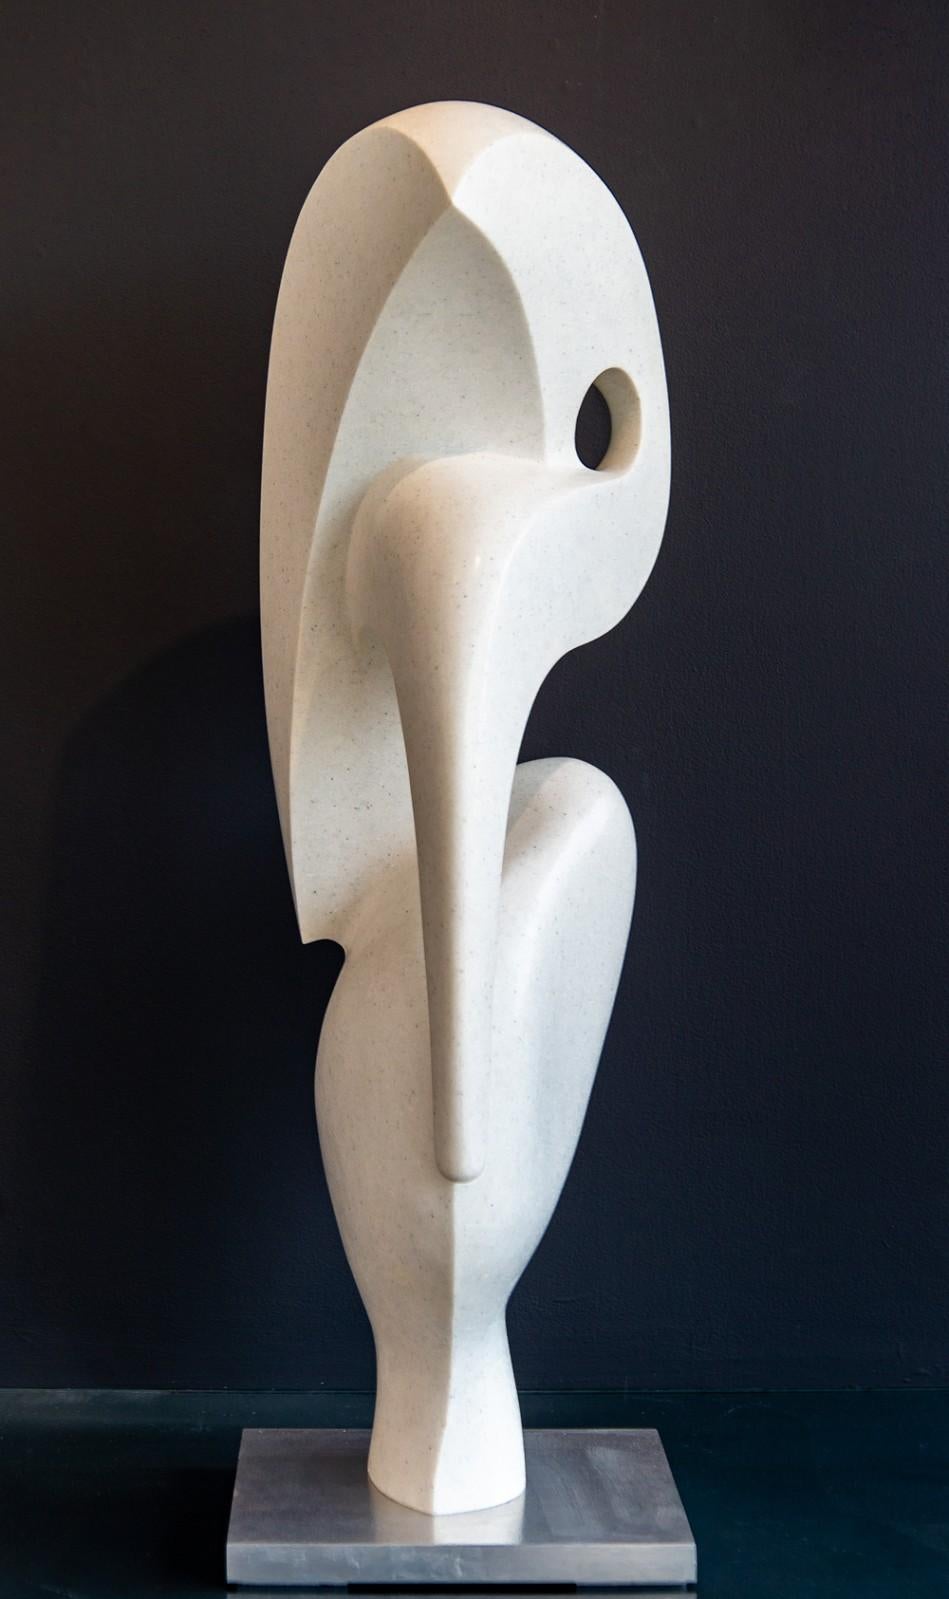 Jeremy Guy Abstract Sculpture - Heron 5/50 - smooth, polished, abstracted figurative, white marble sculpture